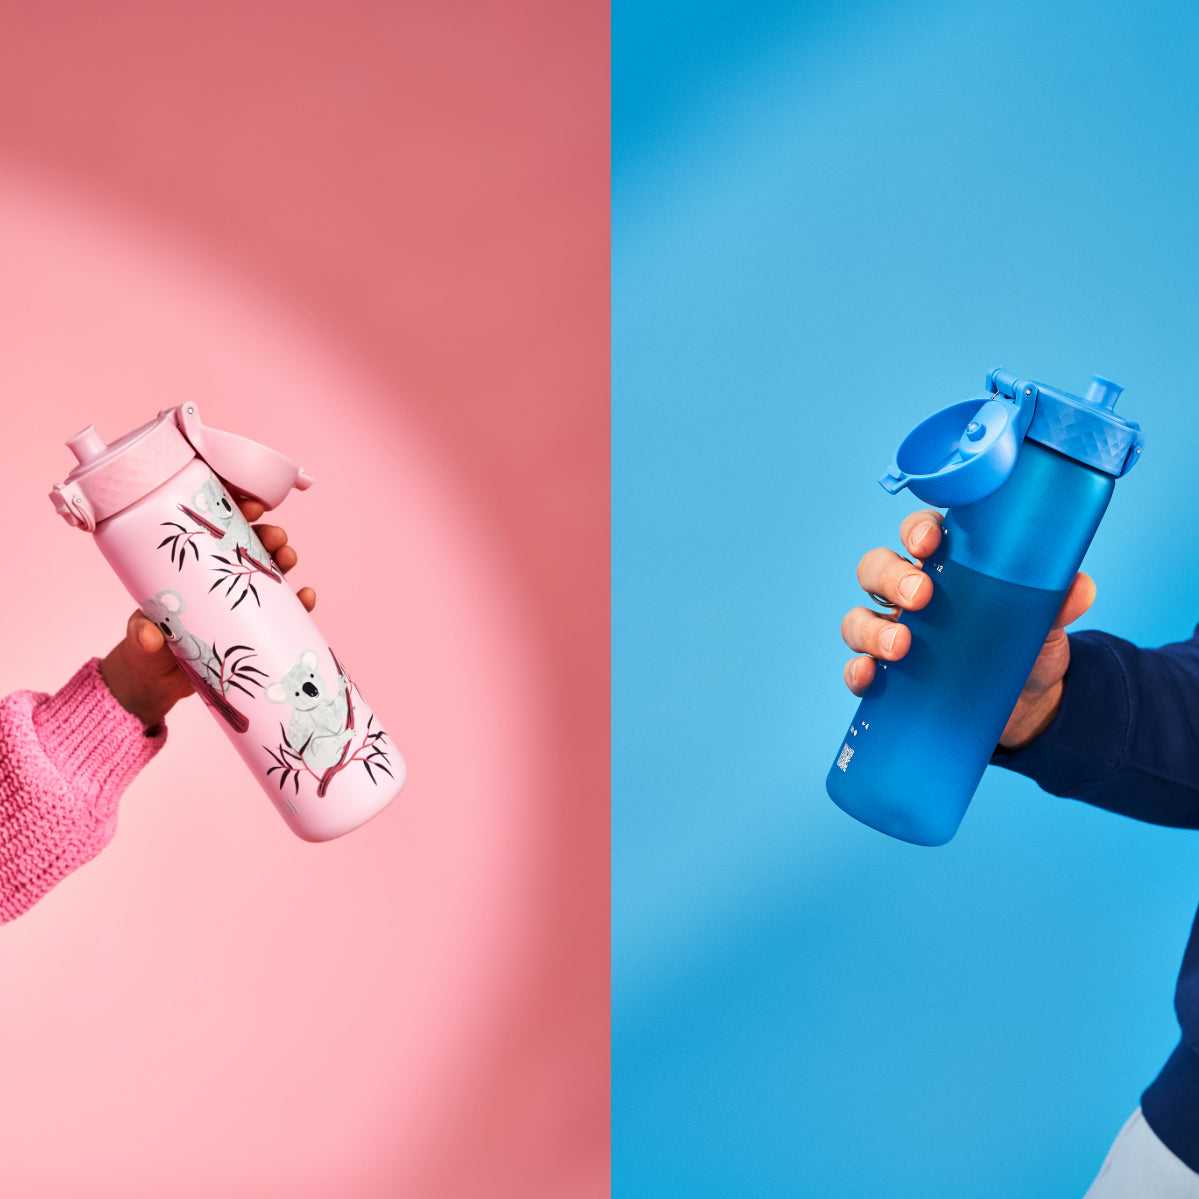 Pink and Blue bottle being held by a boy and a girl in mobile size